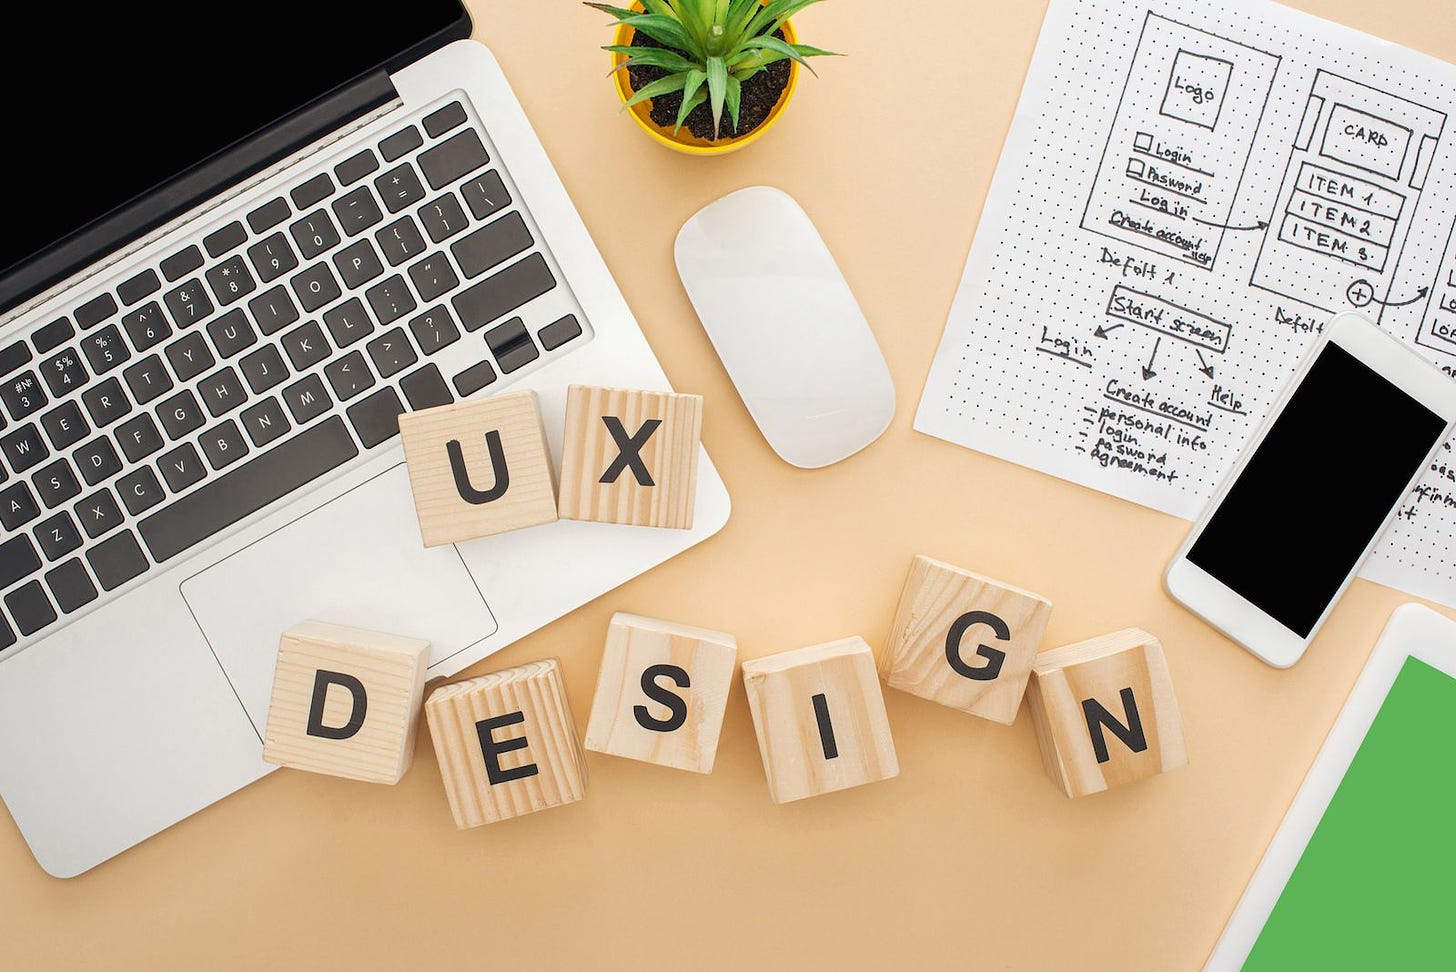 How to Plan Your UX Design Career: Tips for Aspiring UX Designers